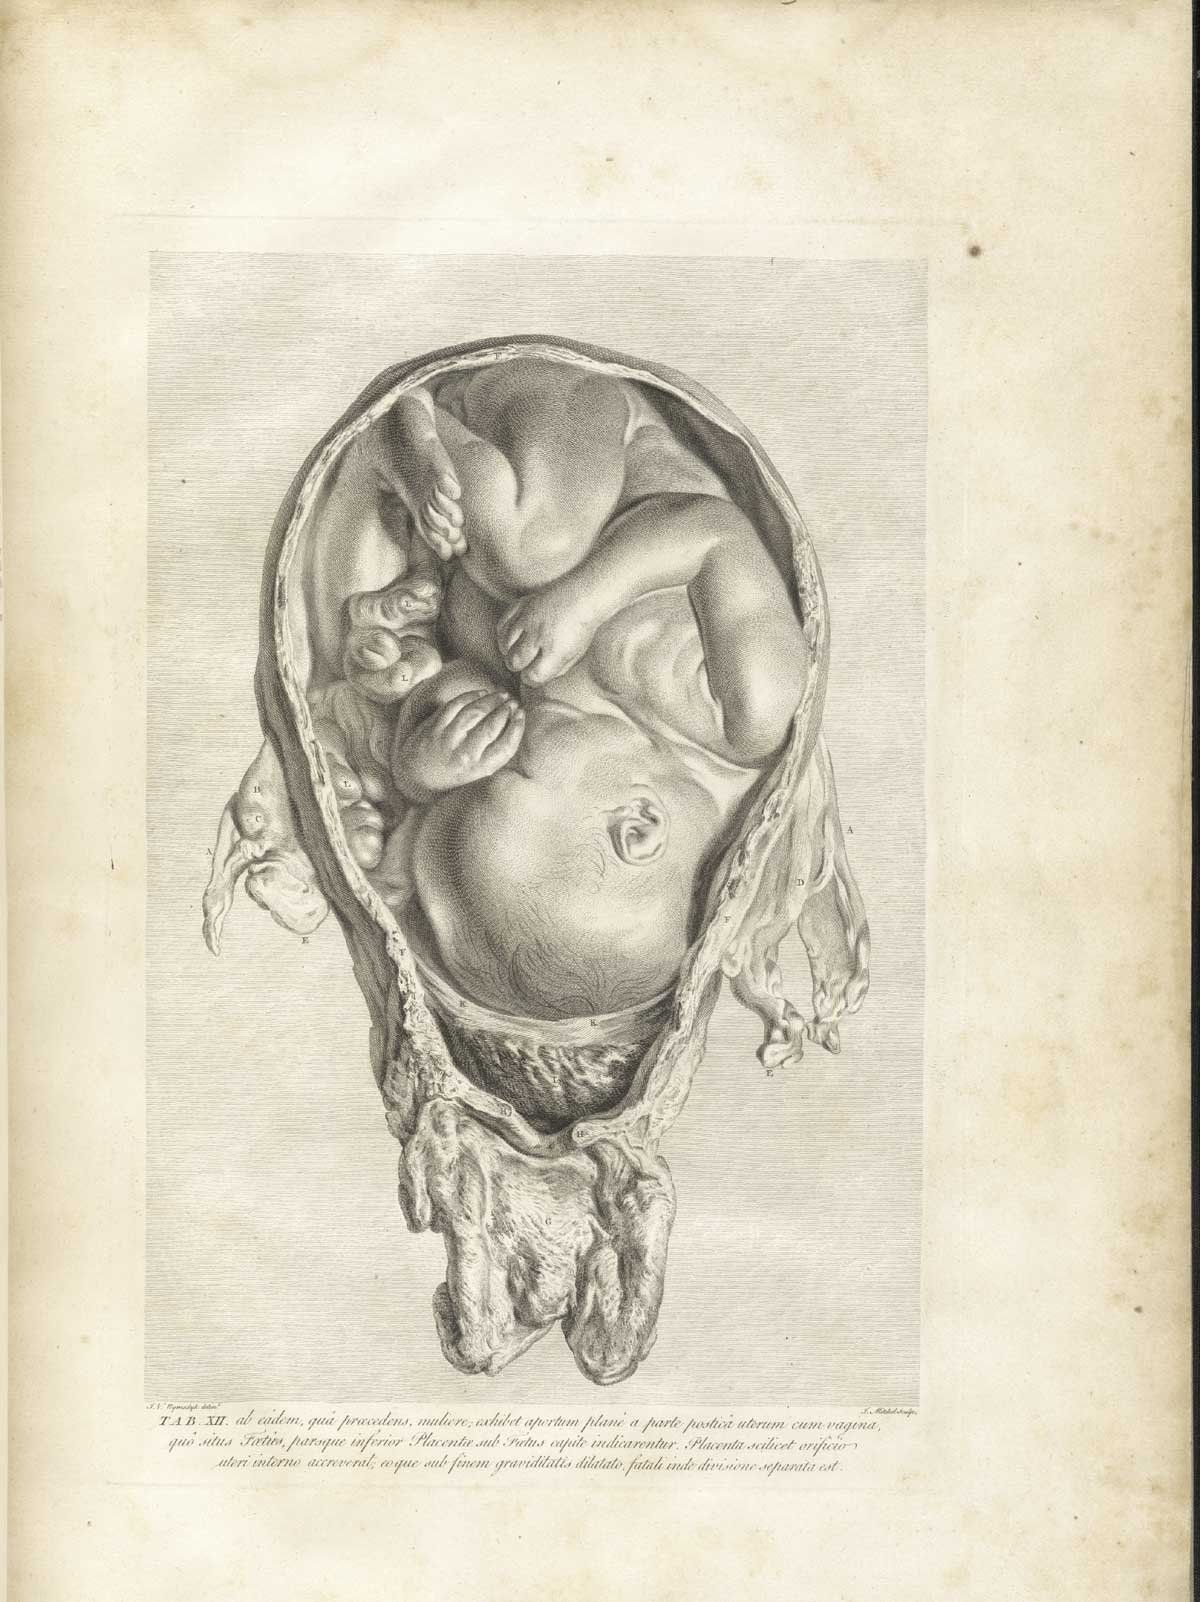 The cross section of a detached uterus with a fetus inside.